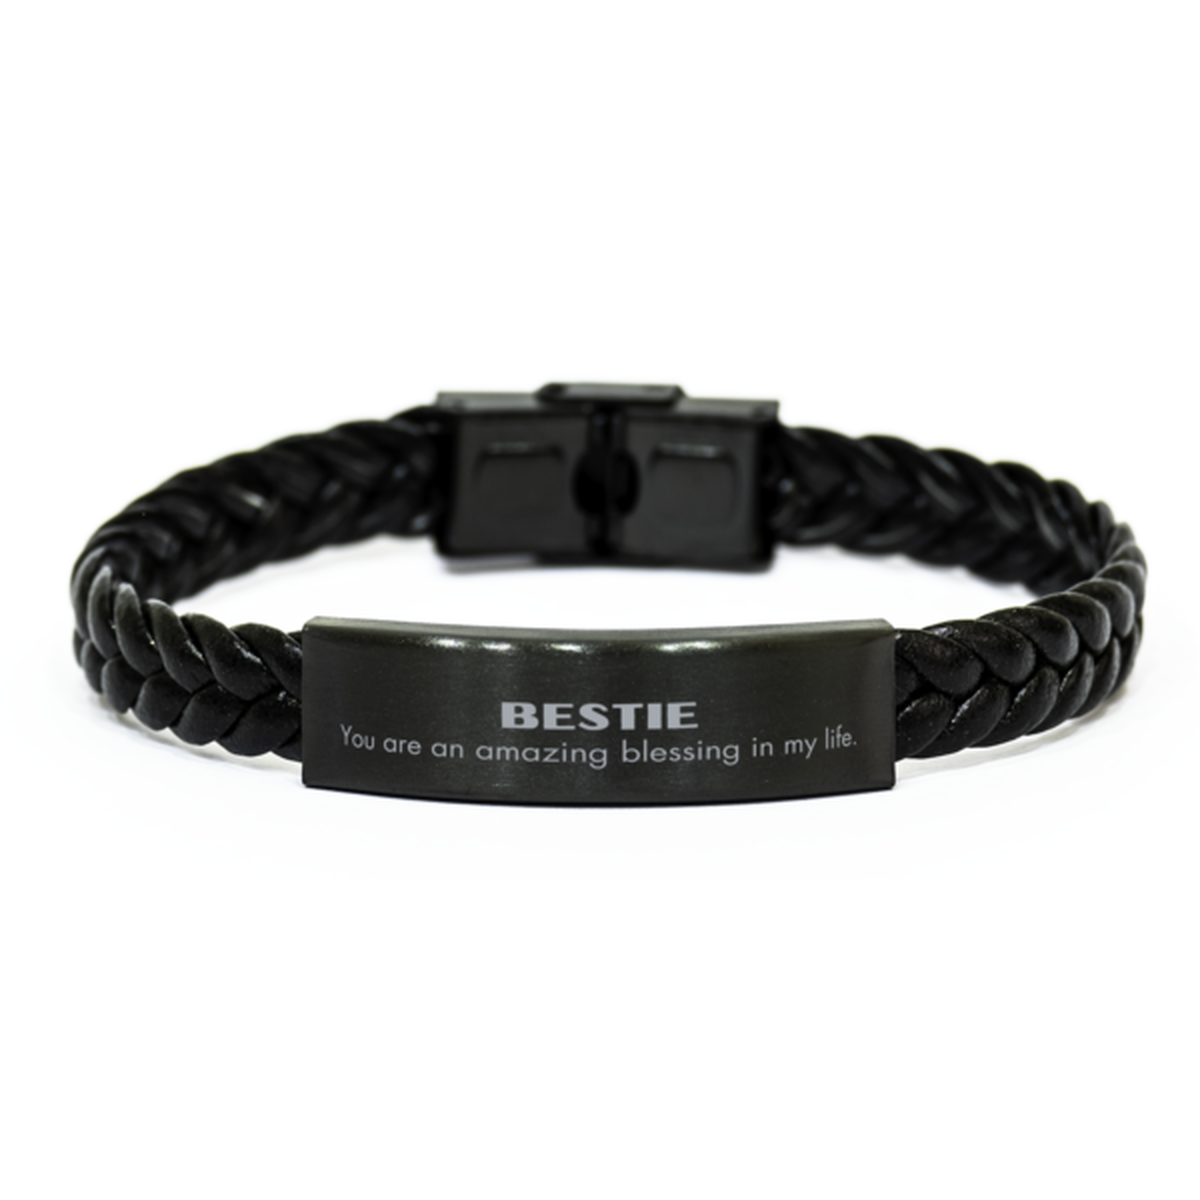 Bestie Braided Leather Bracelet, You are an amazing blessing in my life, Thank You Gifts For Bestie, Inspirational Birthday Christmas Unique Gifts For Bestie